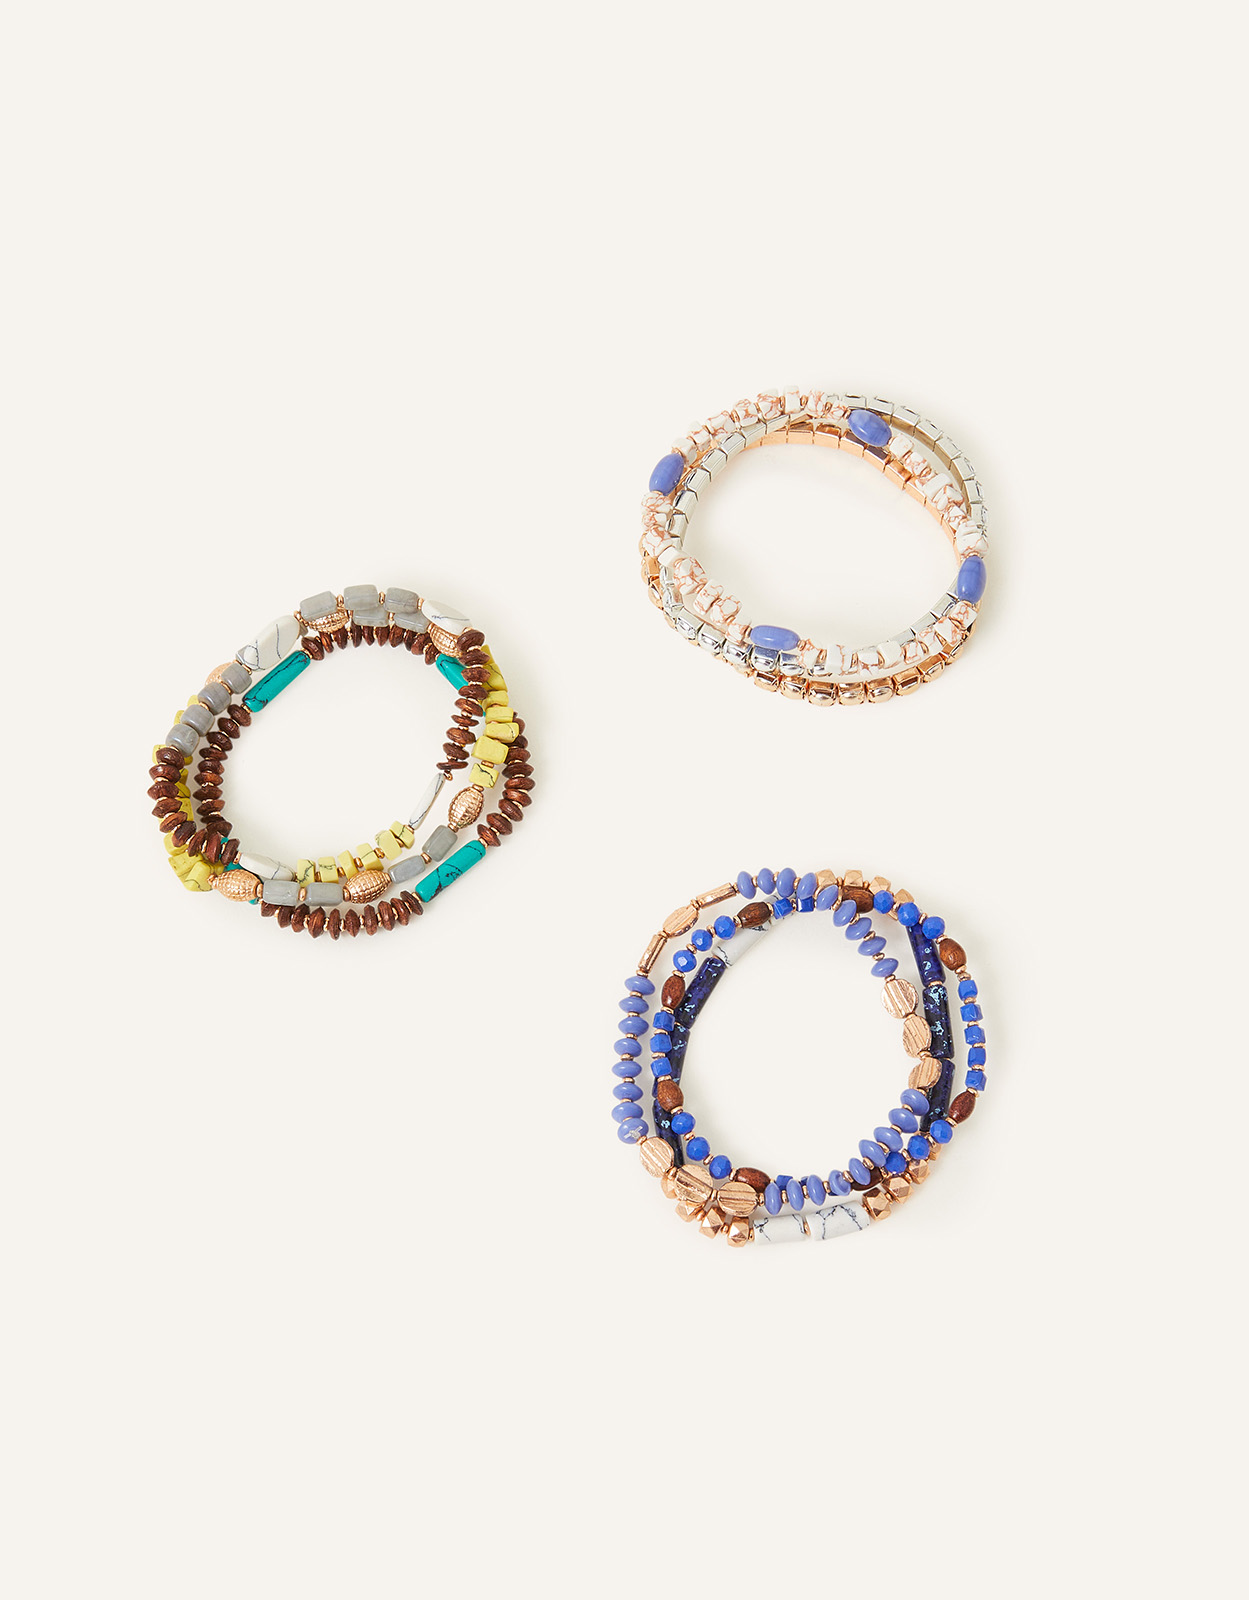 Accessorize Women's Gold, Blue and Brown Stone Pack of 9 Chunky Bead Bracelets, Size: 19cm